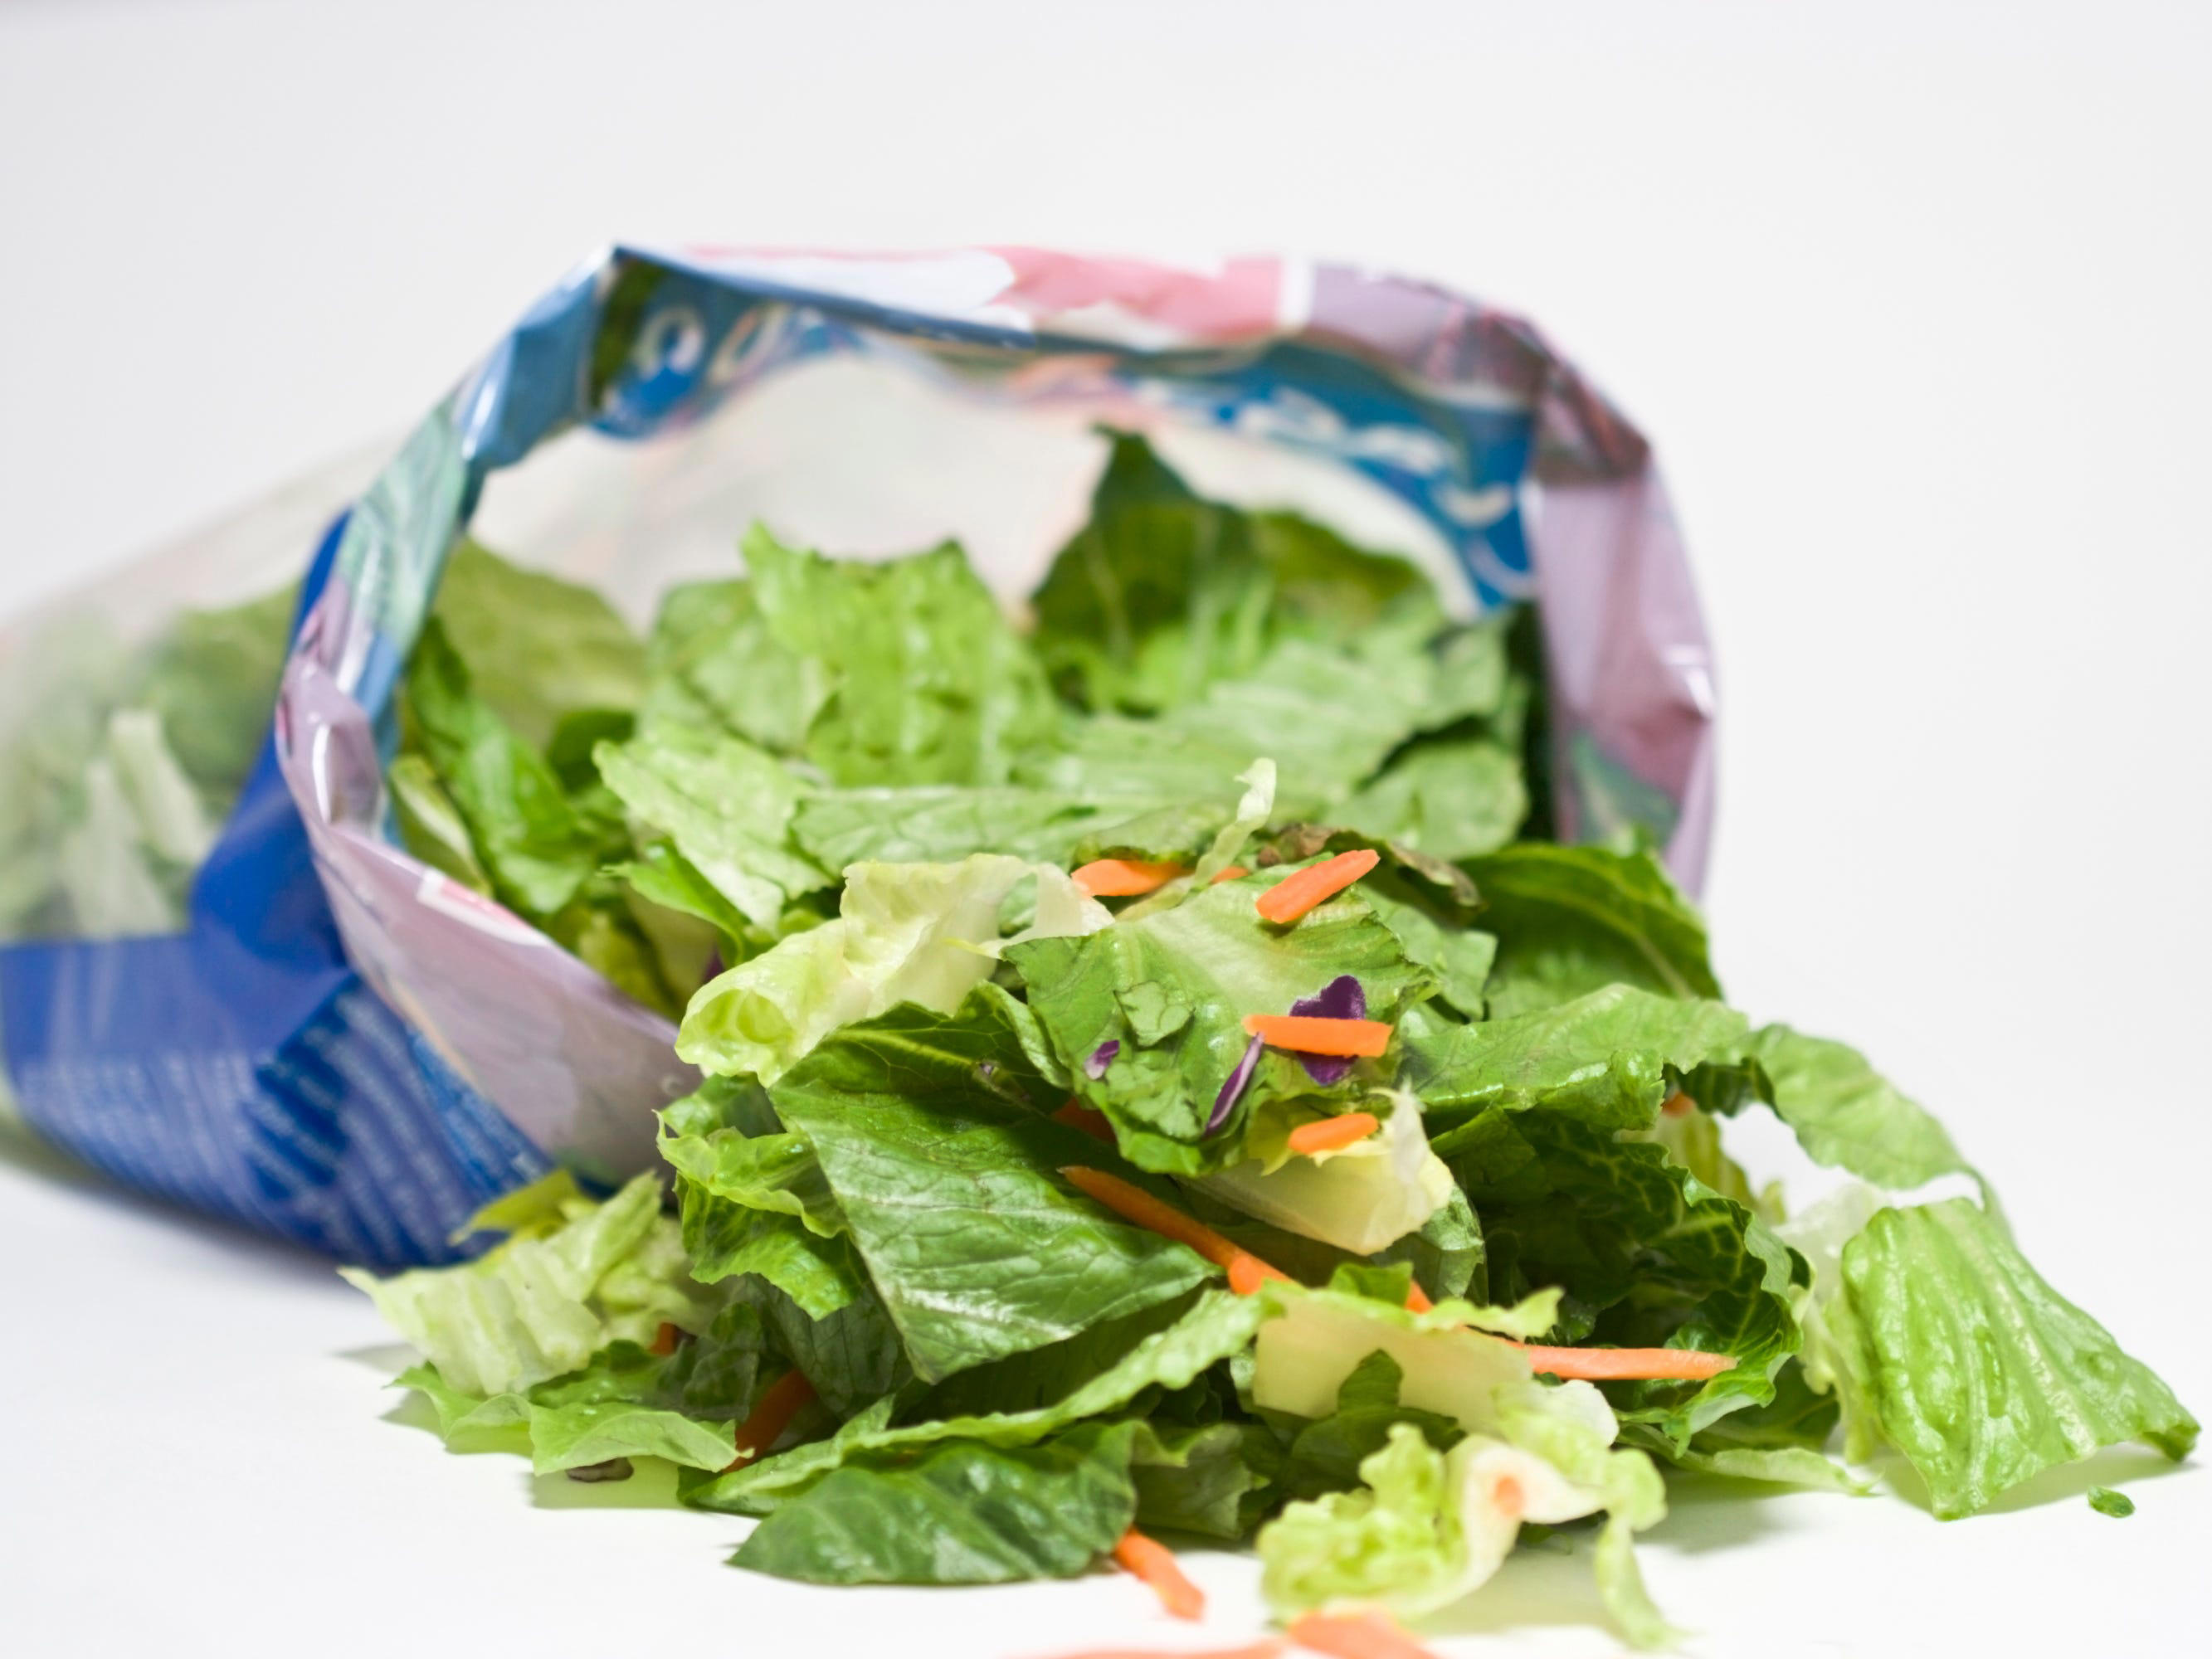 A parasite in bagged salad was linked to a spike in cases of a stomach